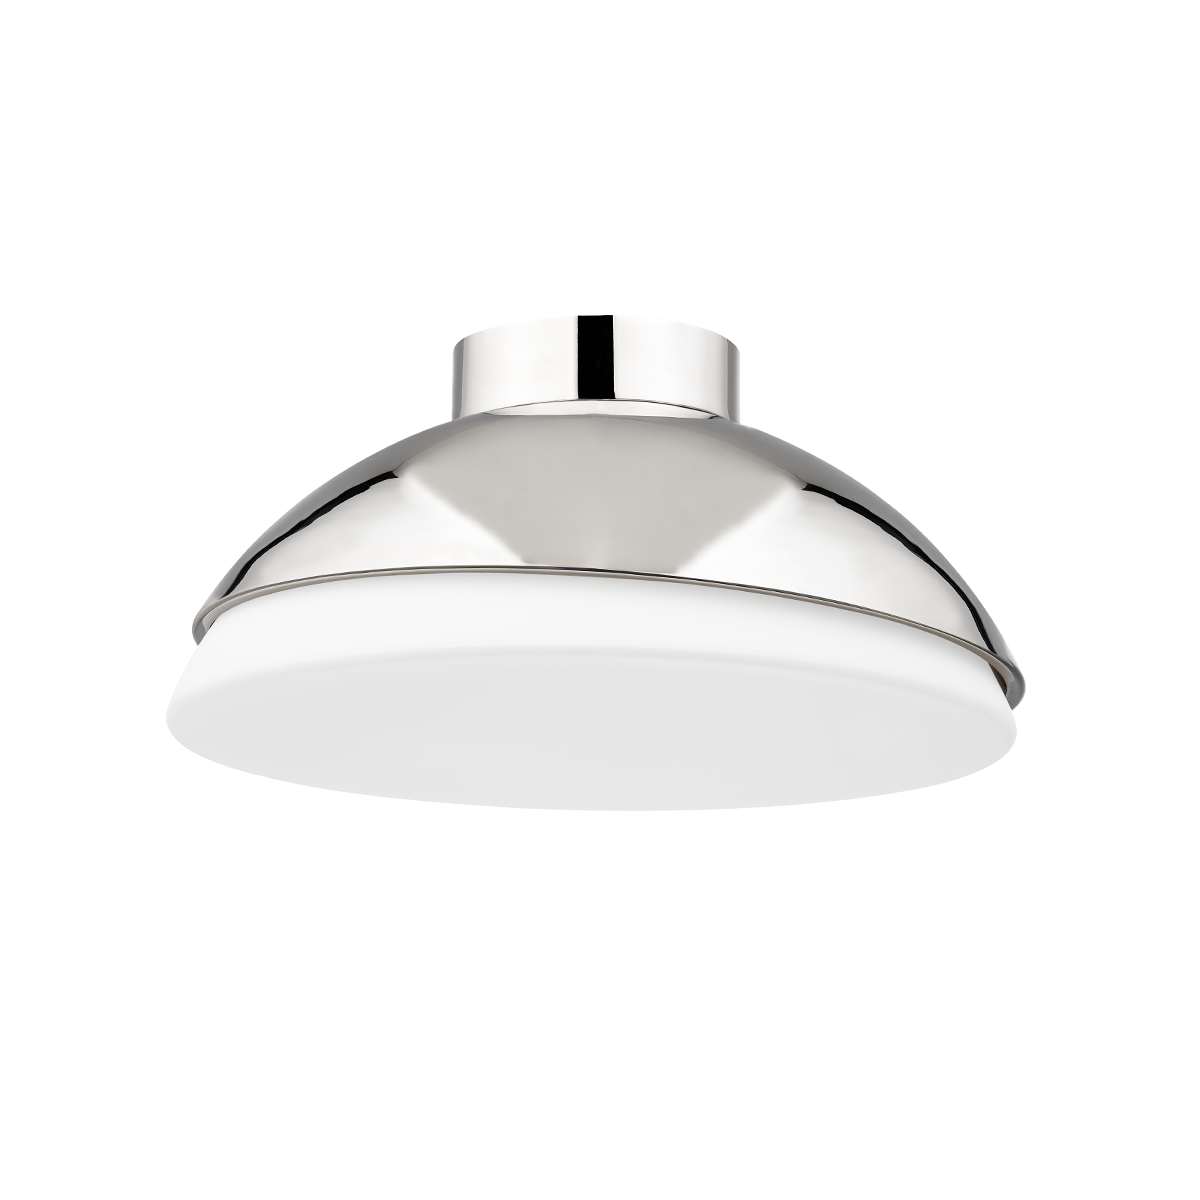 Steel Slanted Shade with Opal Glass Diffuser Flush Mount